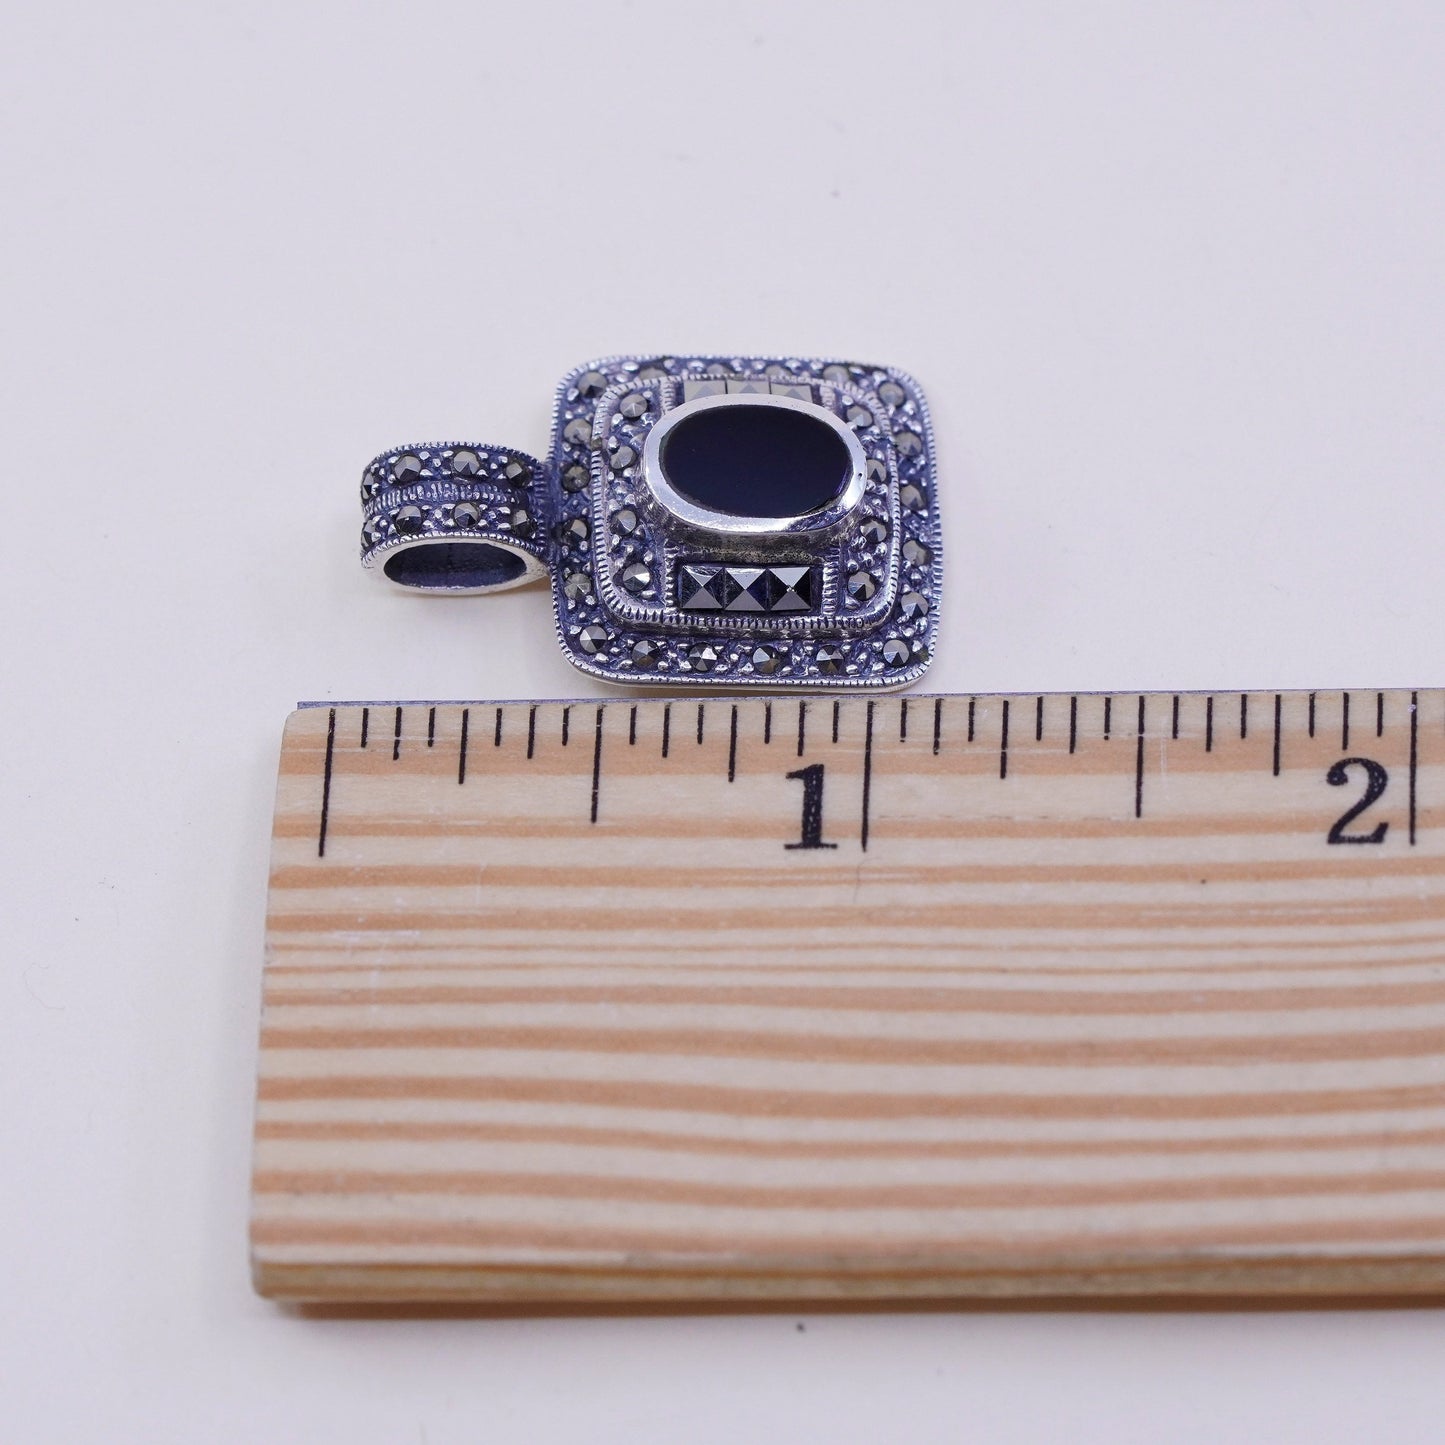 Vintage sterling 925 silver handmade pendant, obsidian with marcasite pendant